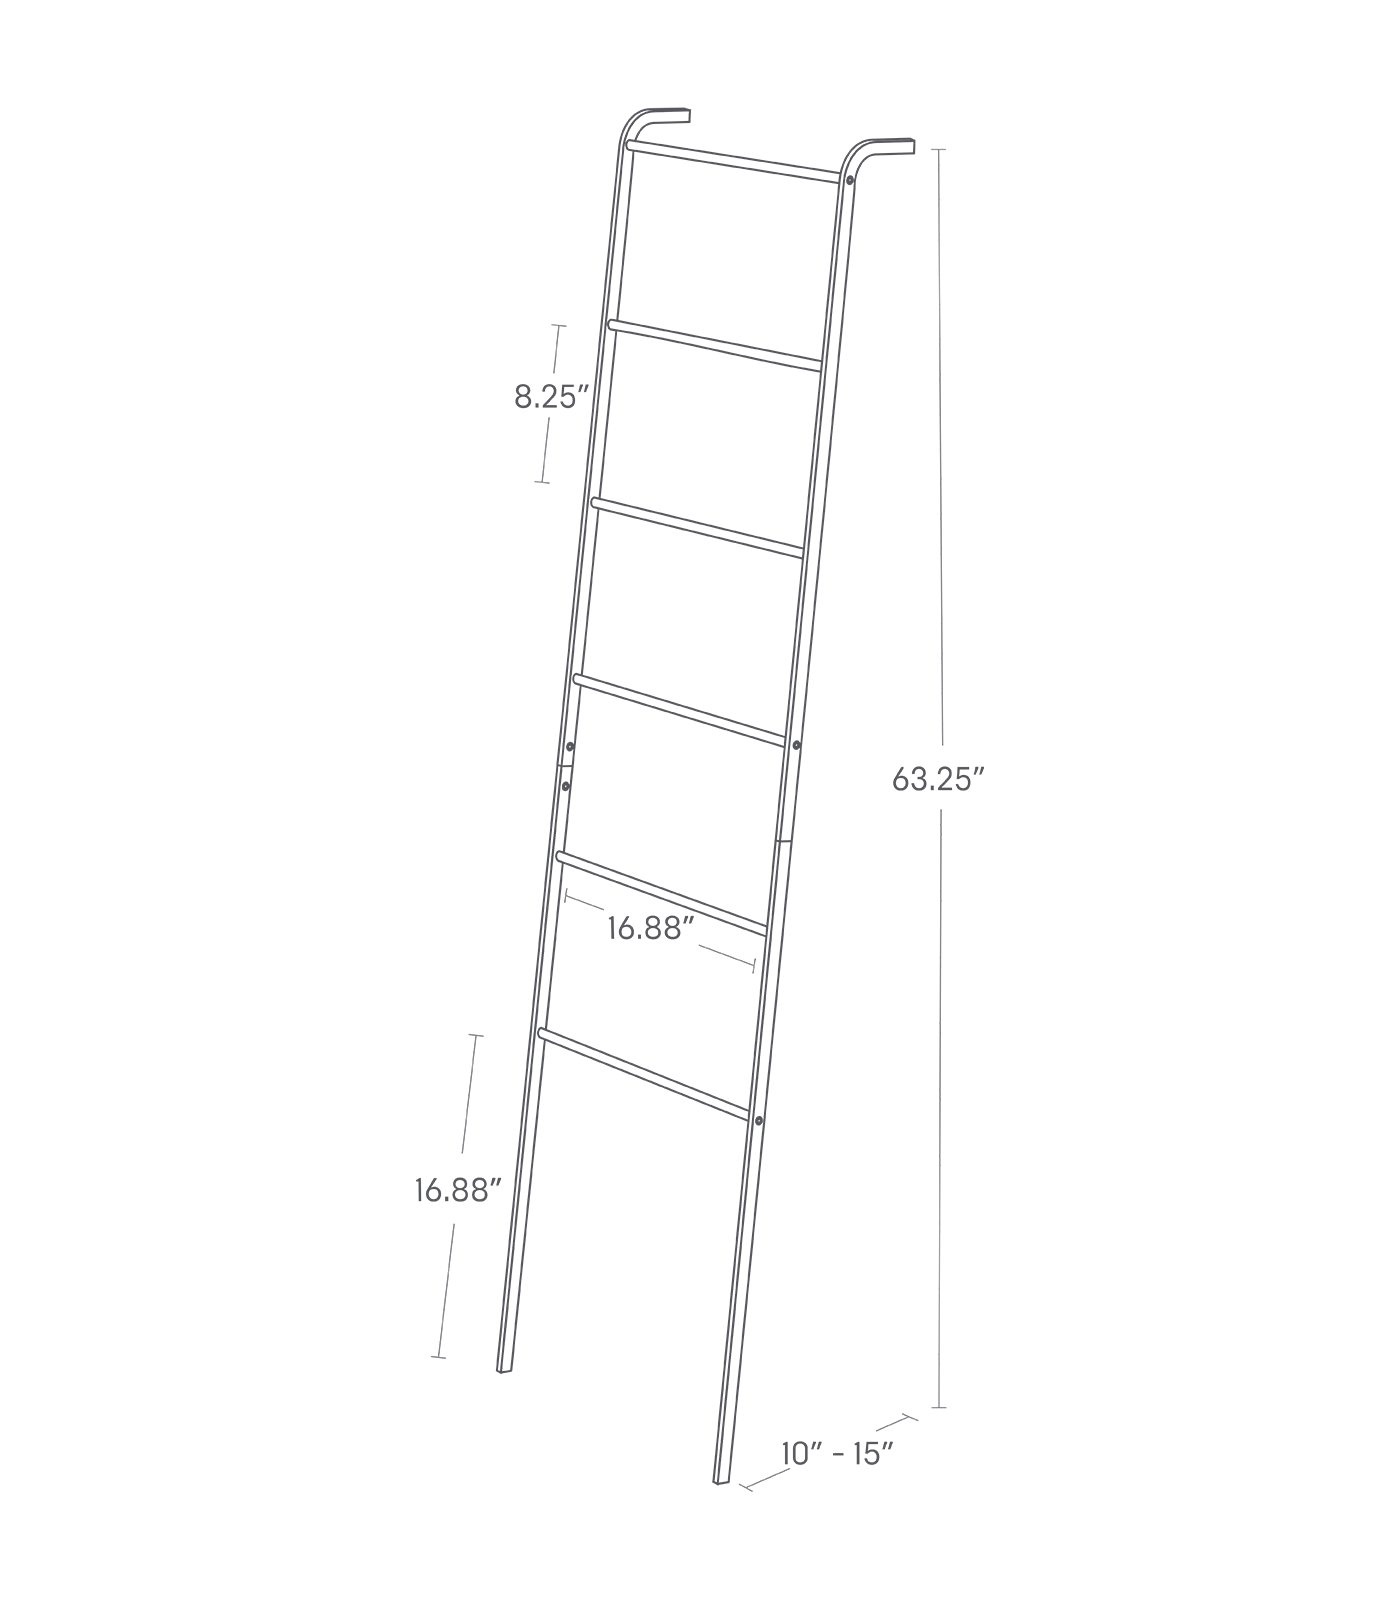 Dimension image for Leaning Storage Ladder - Two Styles on a white background including dimensions  L 9.45 x W 17.72 x H 62.99 inches